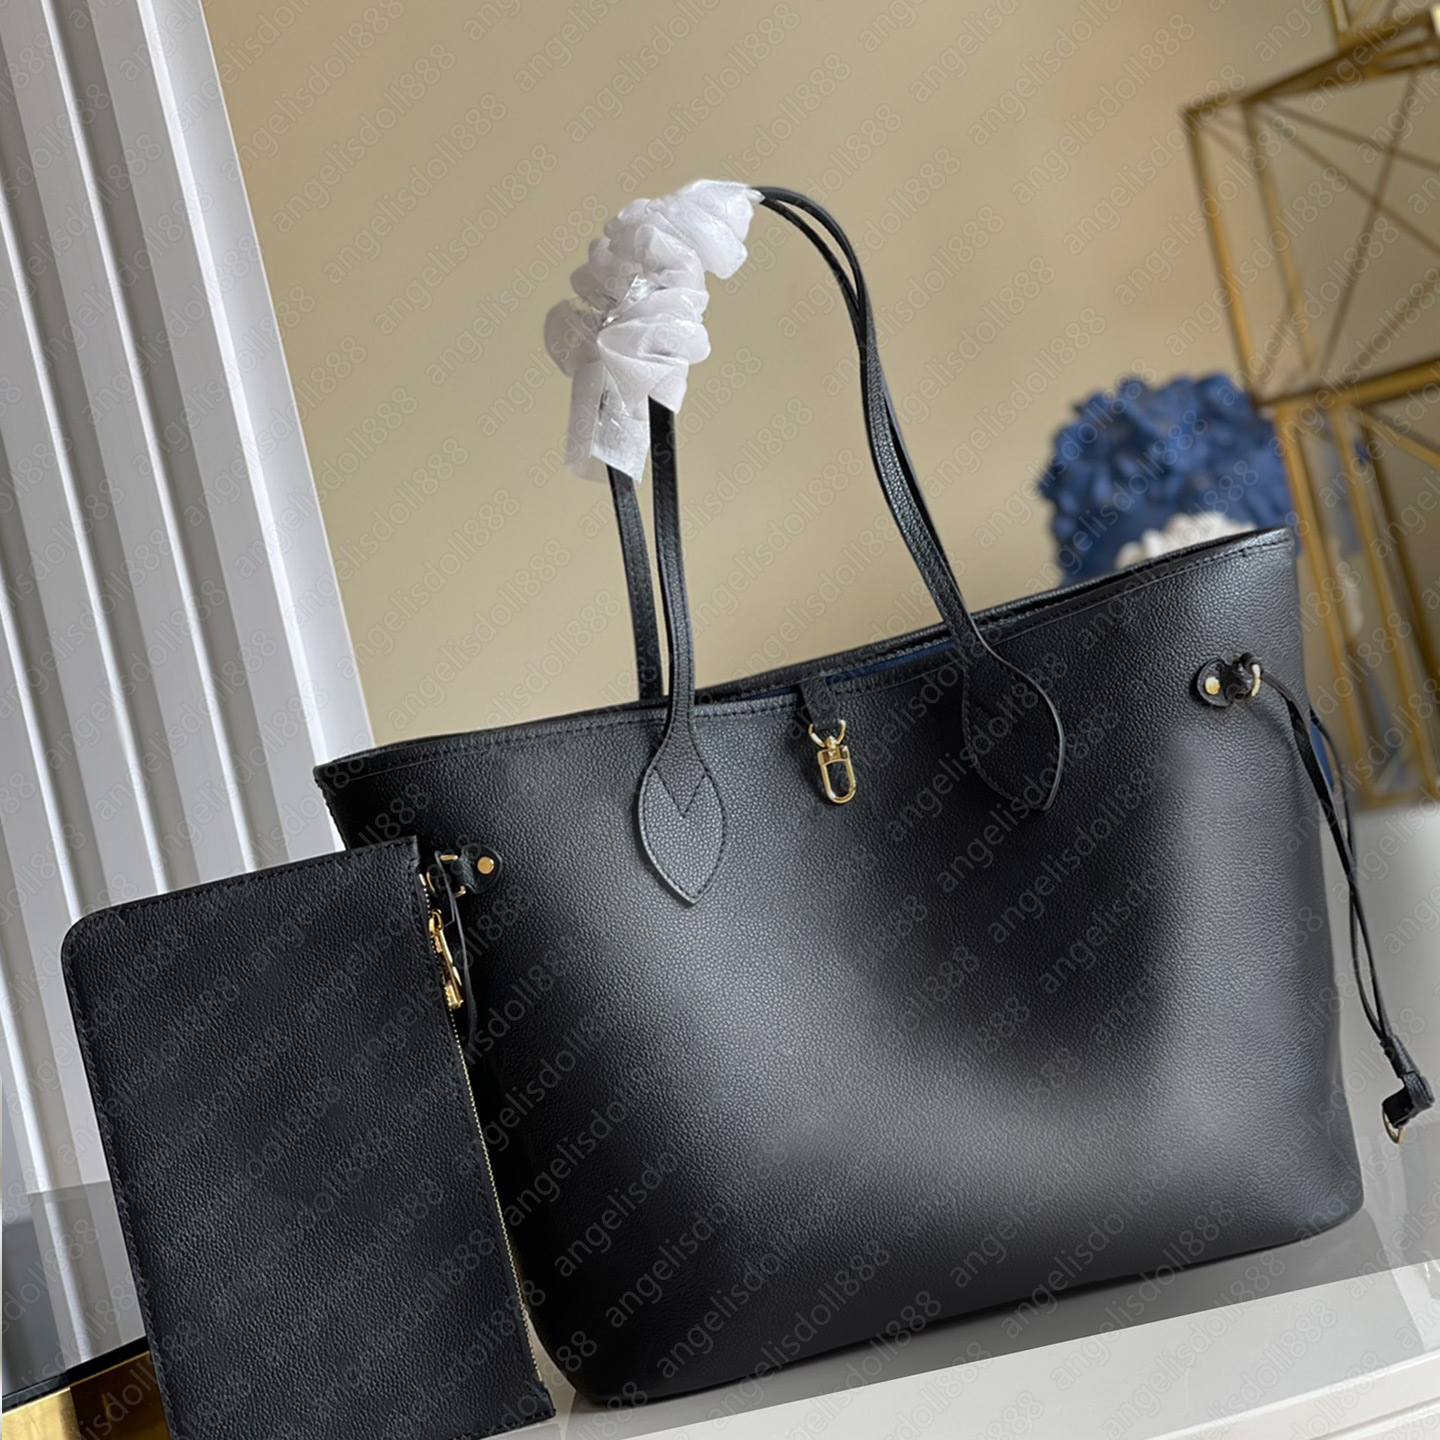 

Women black full genuine leather letters embossed tote neverfuII shopping bags with Date Code Luxurys Designers brand composite Handbags Shoulder Bag, Contact us